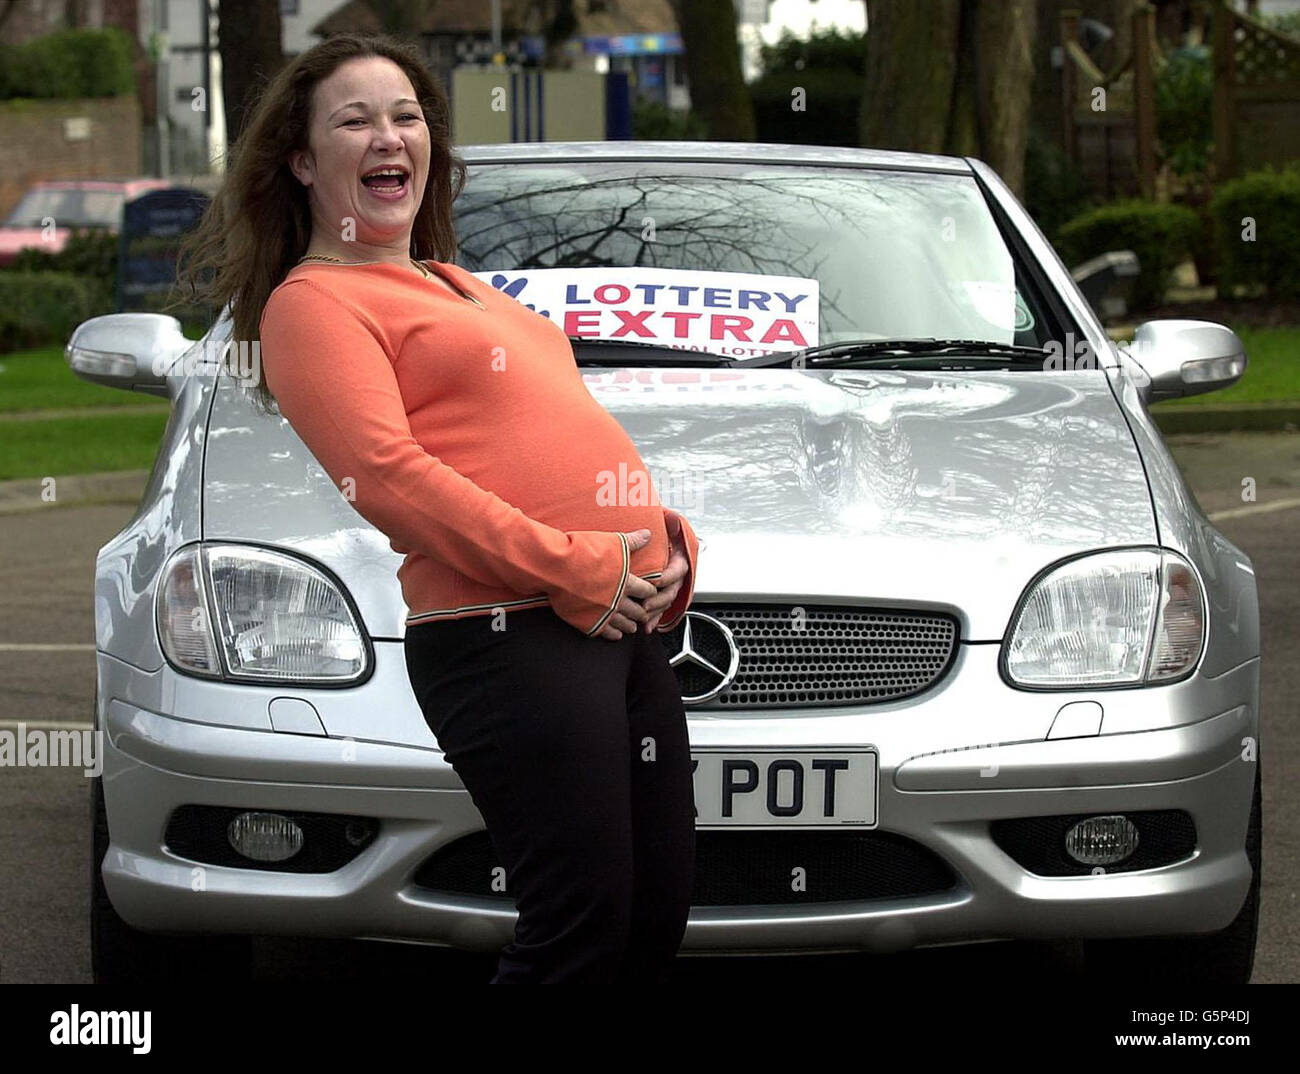 Expectant mum from Luton, Susan Martin, 30, by a top of the range Mercedes SLK she hopes buy, after winning the 4,744,343 jackpot prize in Saturday's Lottery Extra draw. Susan Martin said she and her partner, Steven Hughes, 39, * have postponed a dream holiday in Hawaii until her second child, due in May, has been born. Stock Photo